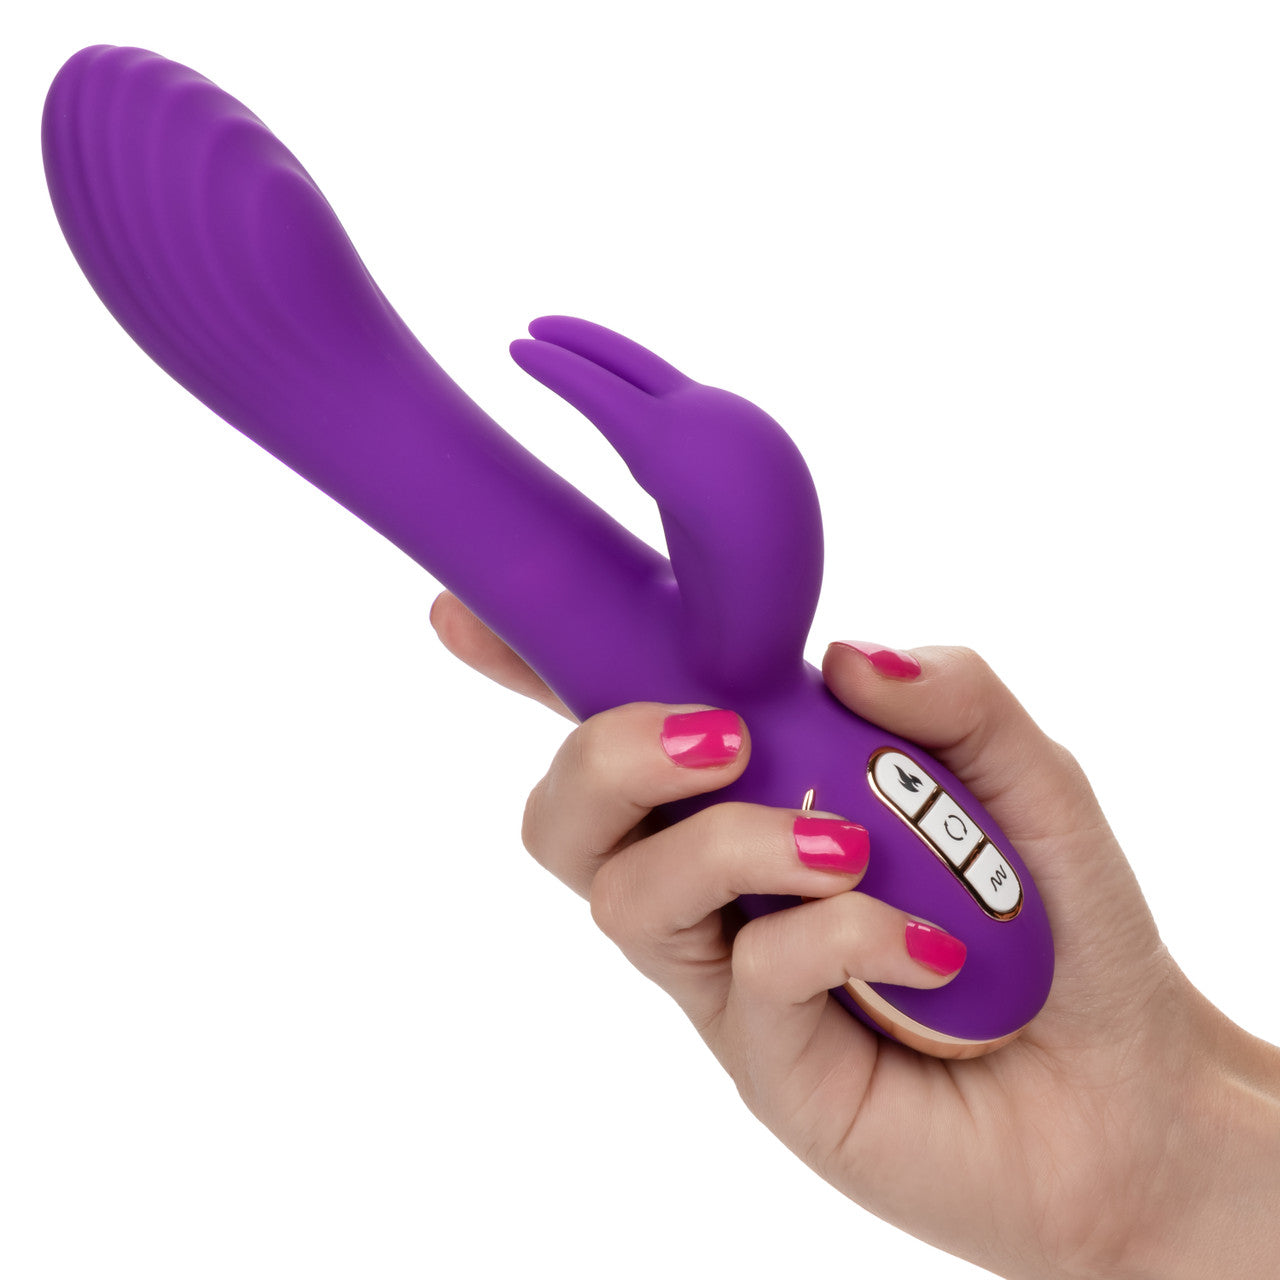 Jack Rabbit Signature Heated Silicone Rotating "G" Rabbit - Thorn & Feather Sex Toy Canada